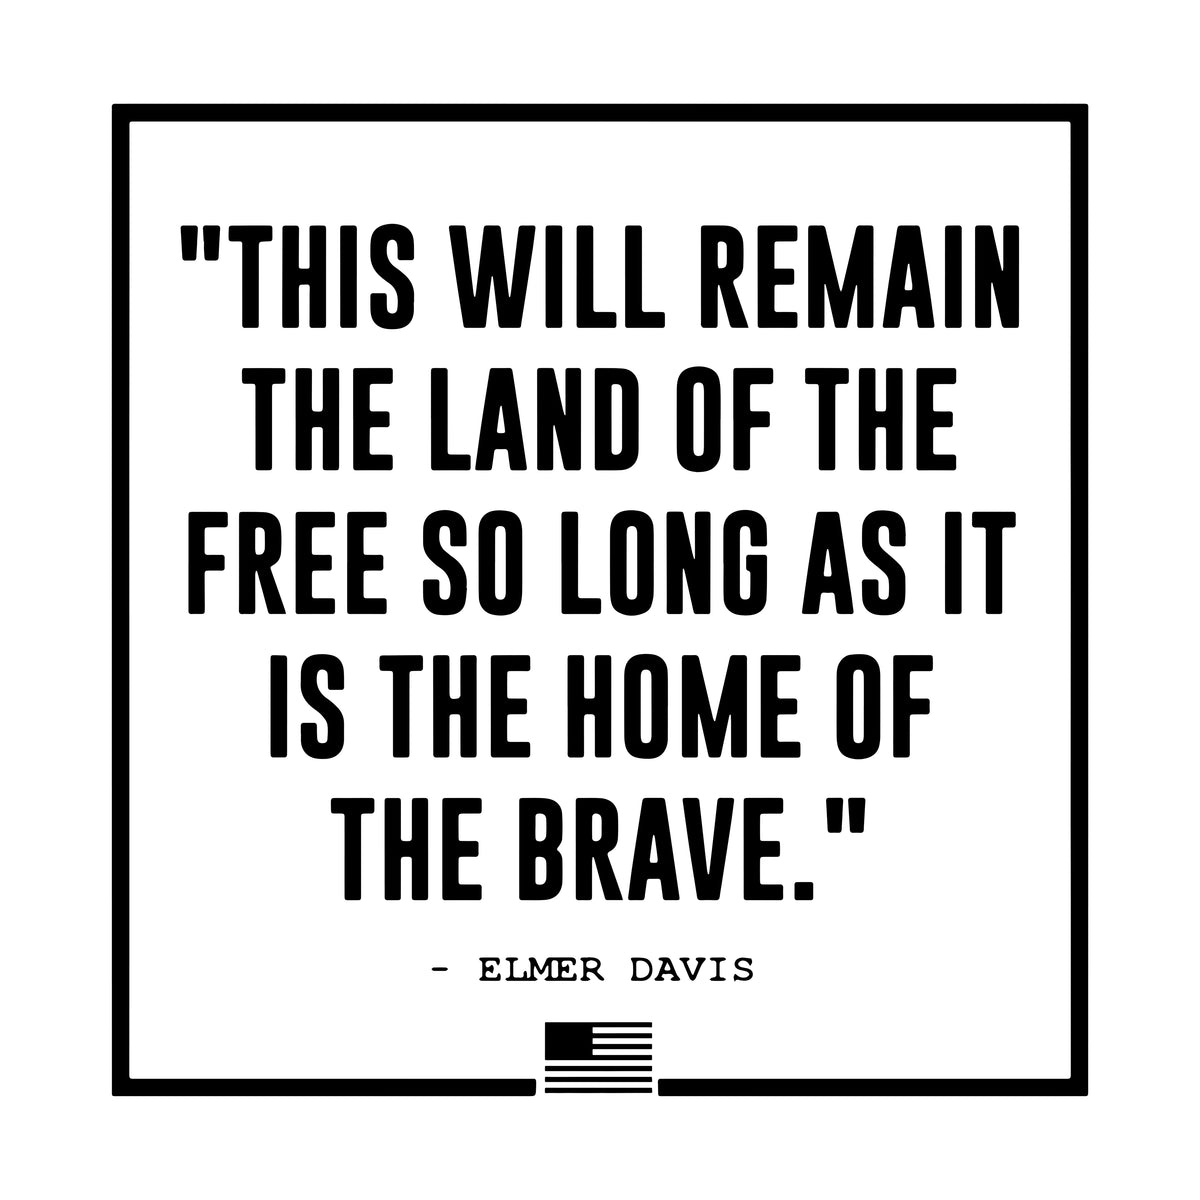 Home Of The Brave Quote Tee